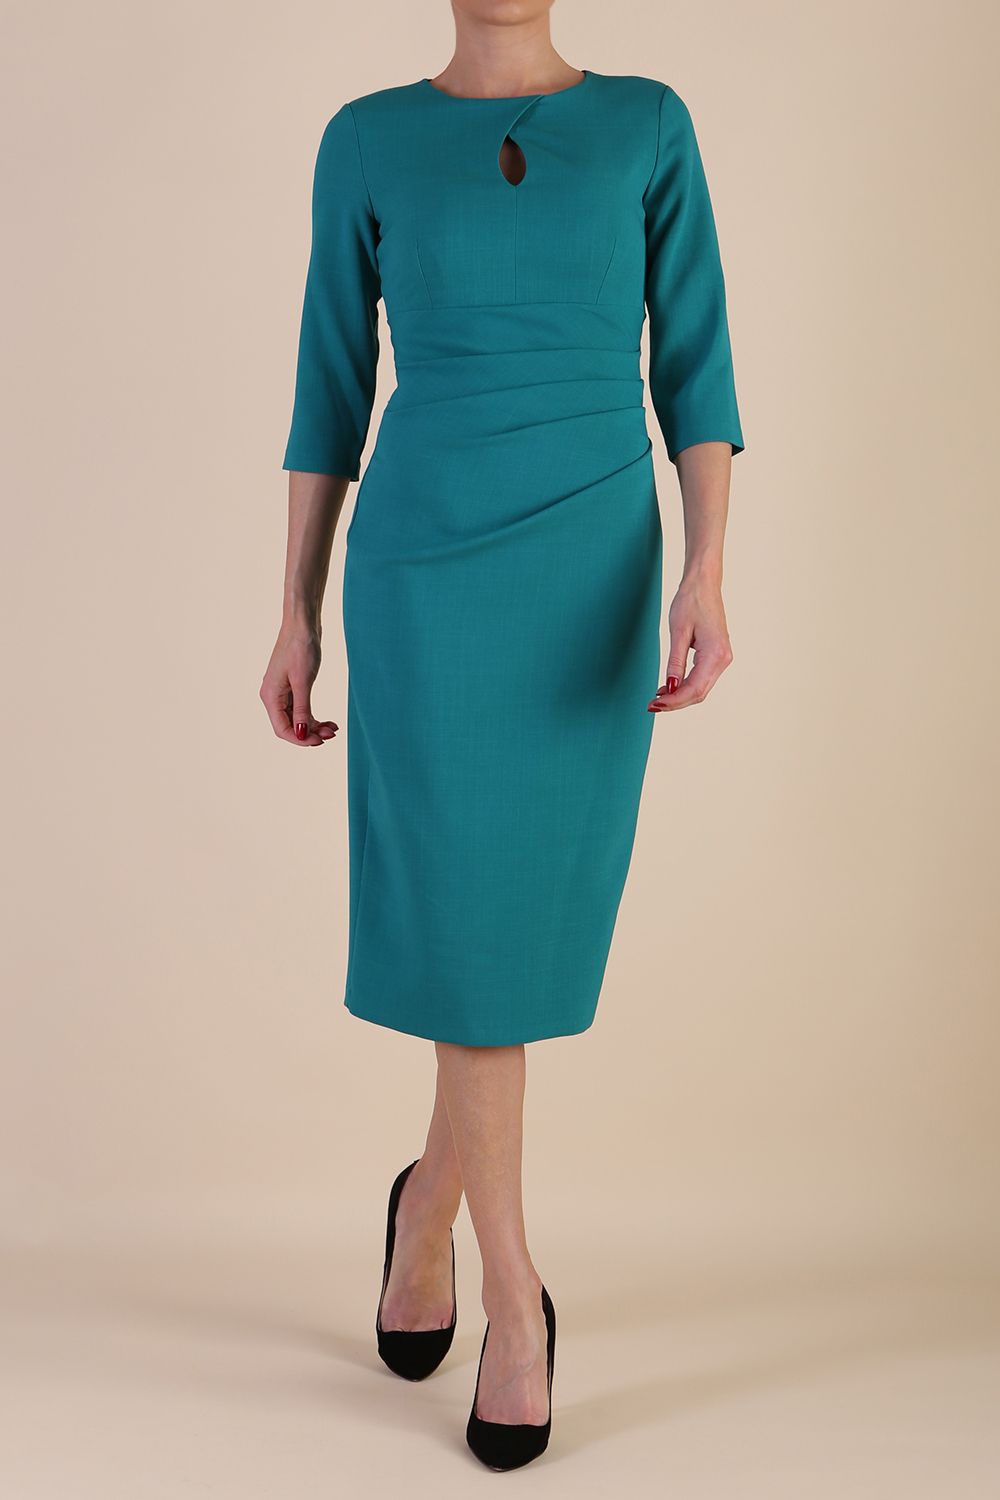 model wearing diva catwalk ubrique pencil dress with a keyhole detail and sleeves in parasailing green